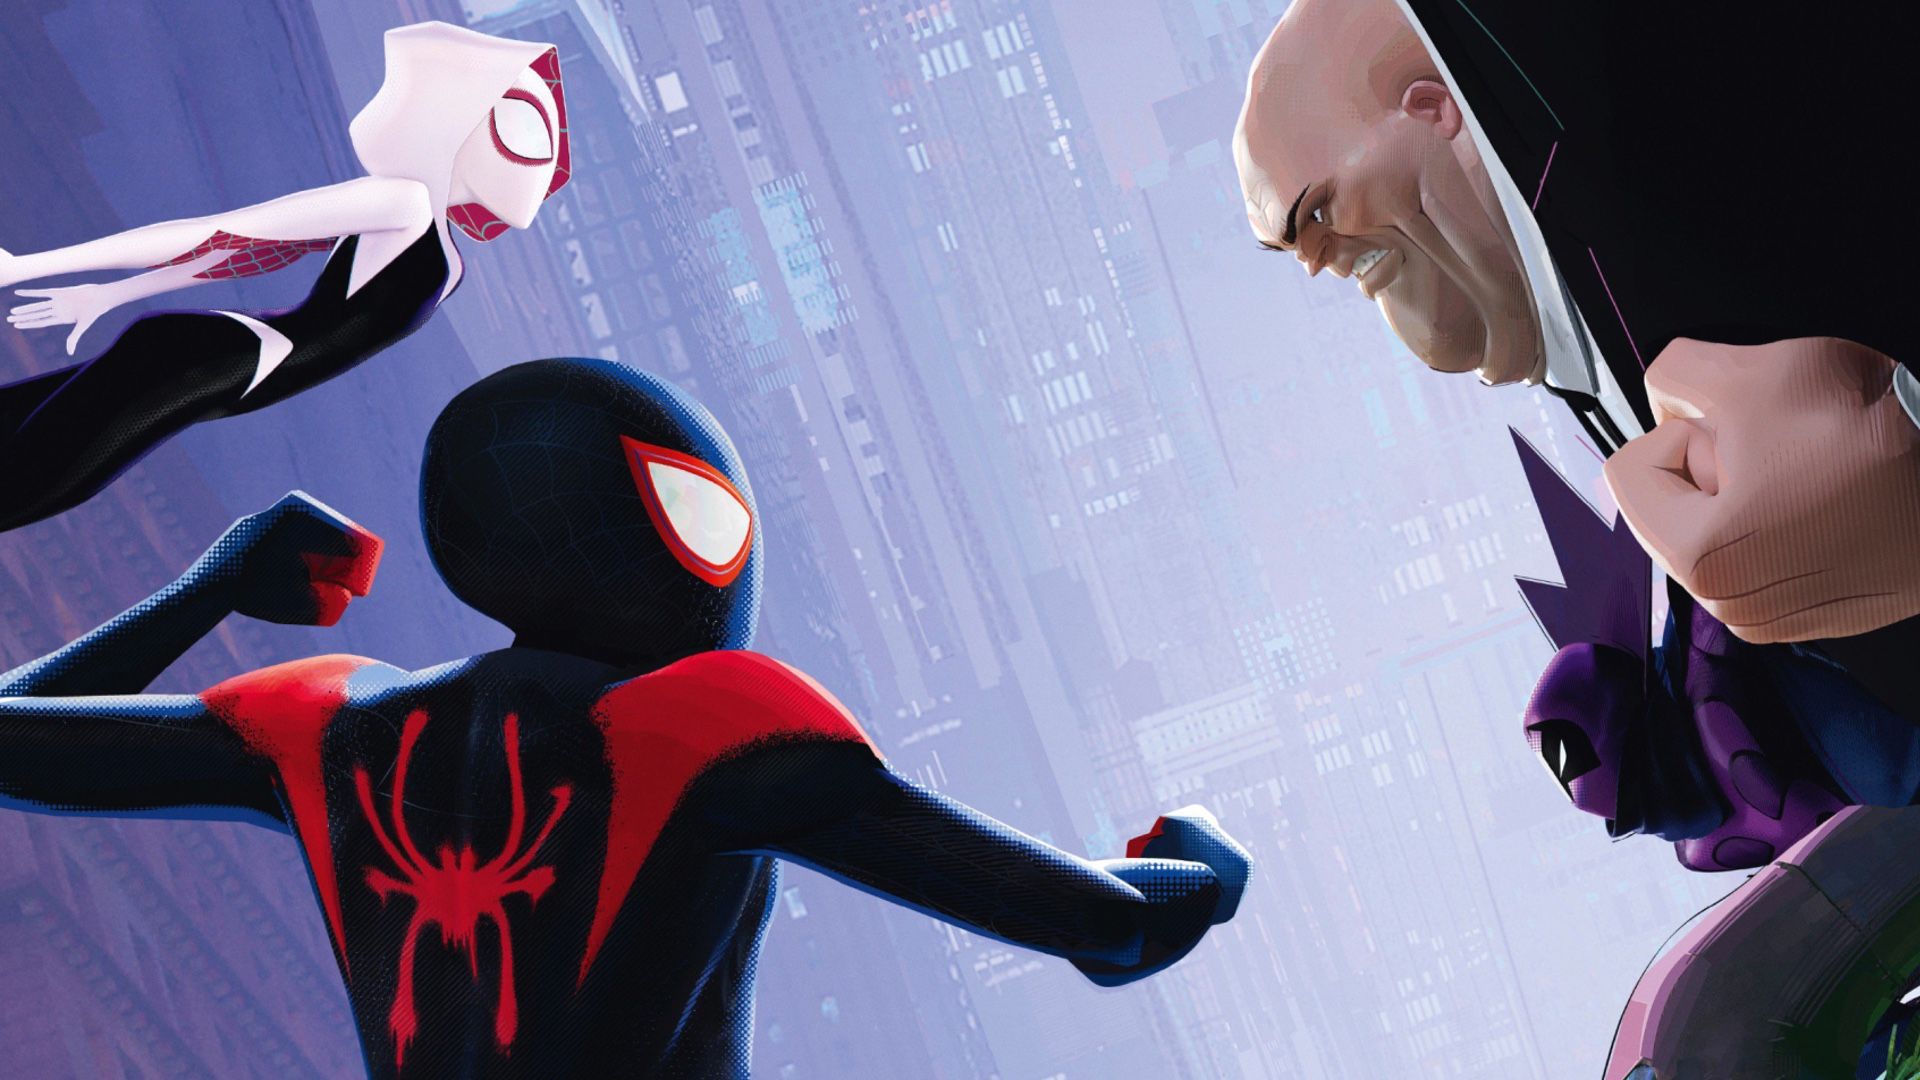 The SPIDER MAN: INTO THE SPIDER VERSE Sequel Will Focus On Miles Morales And Gwen Stacy's Relationship